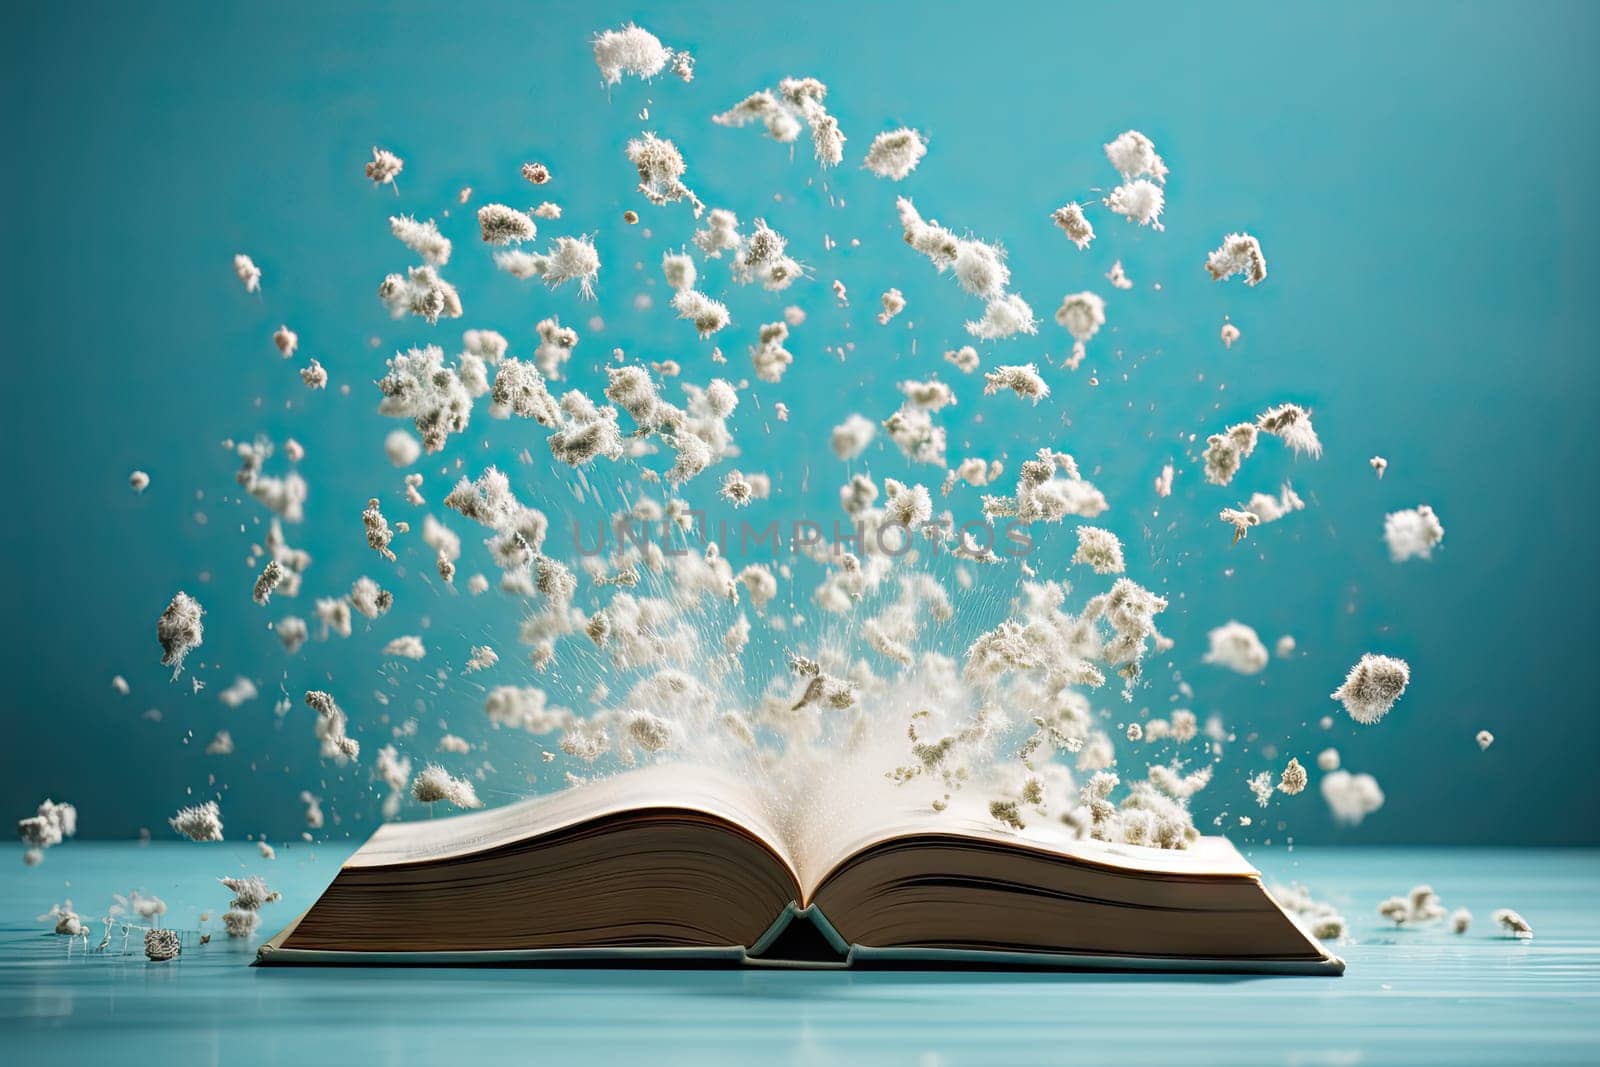 The Whimsical Journey of Knowledge: An Open Book Unleashing a Magical Shower of White Blossoms